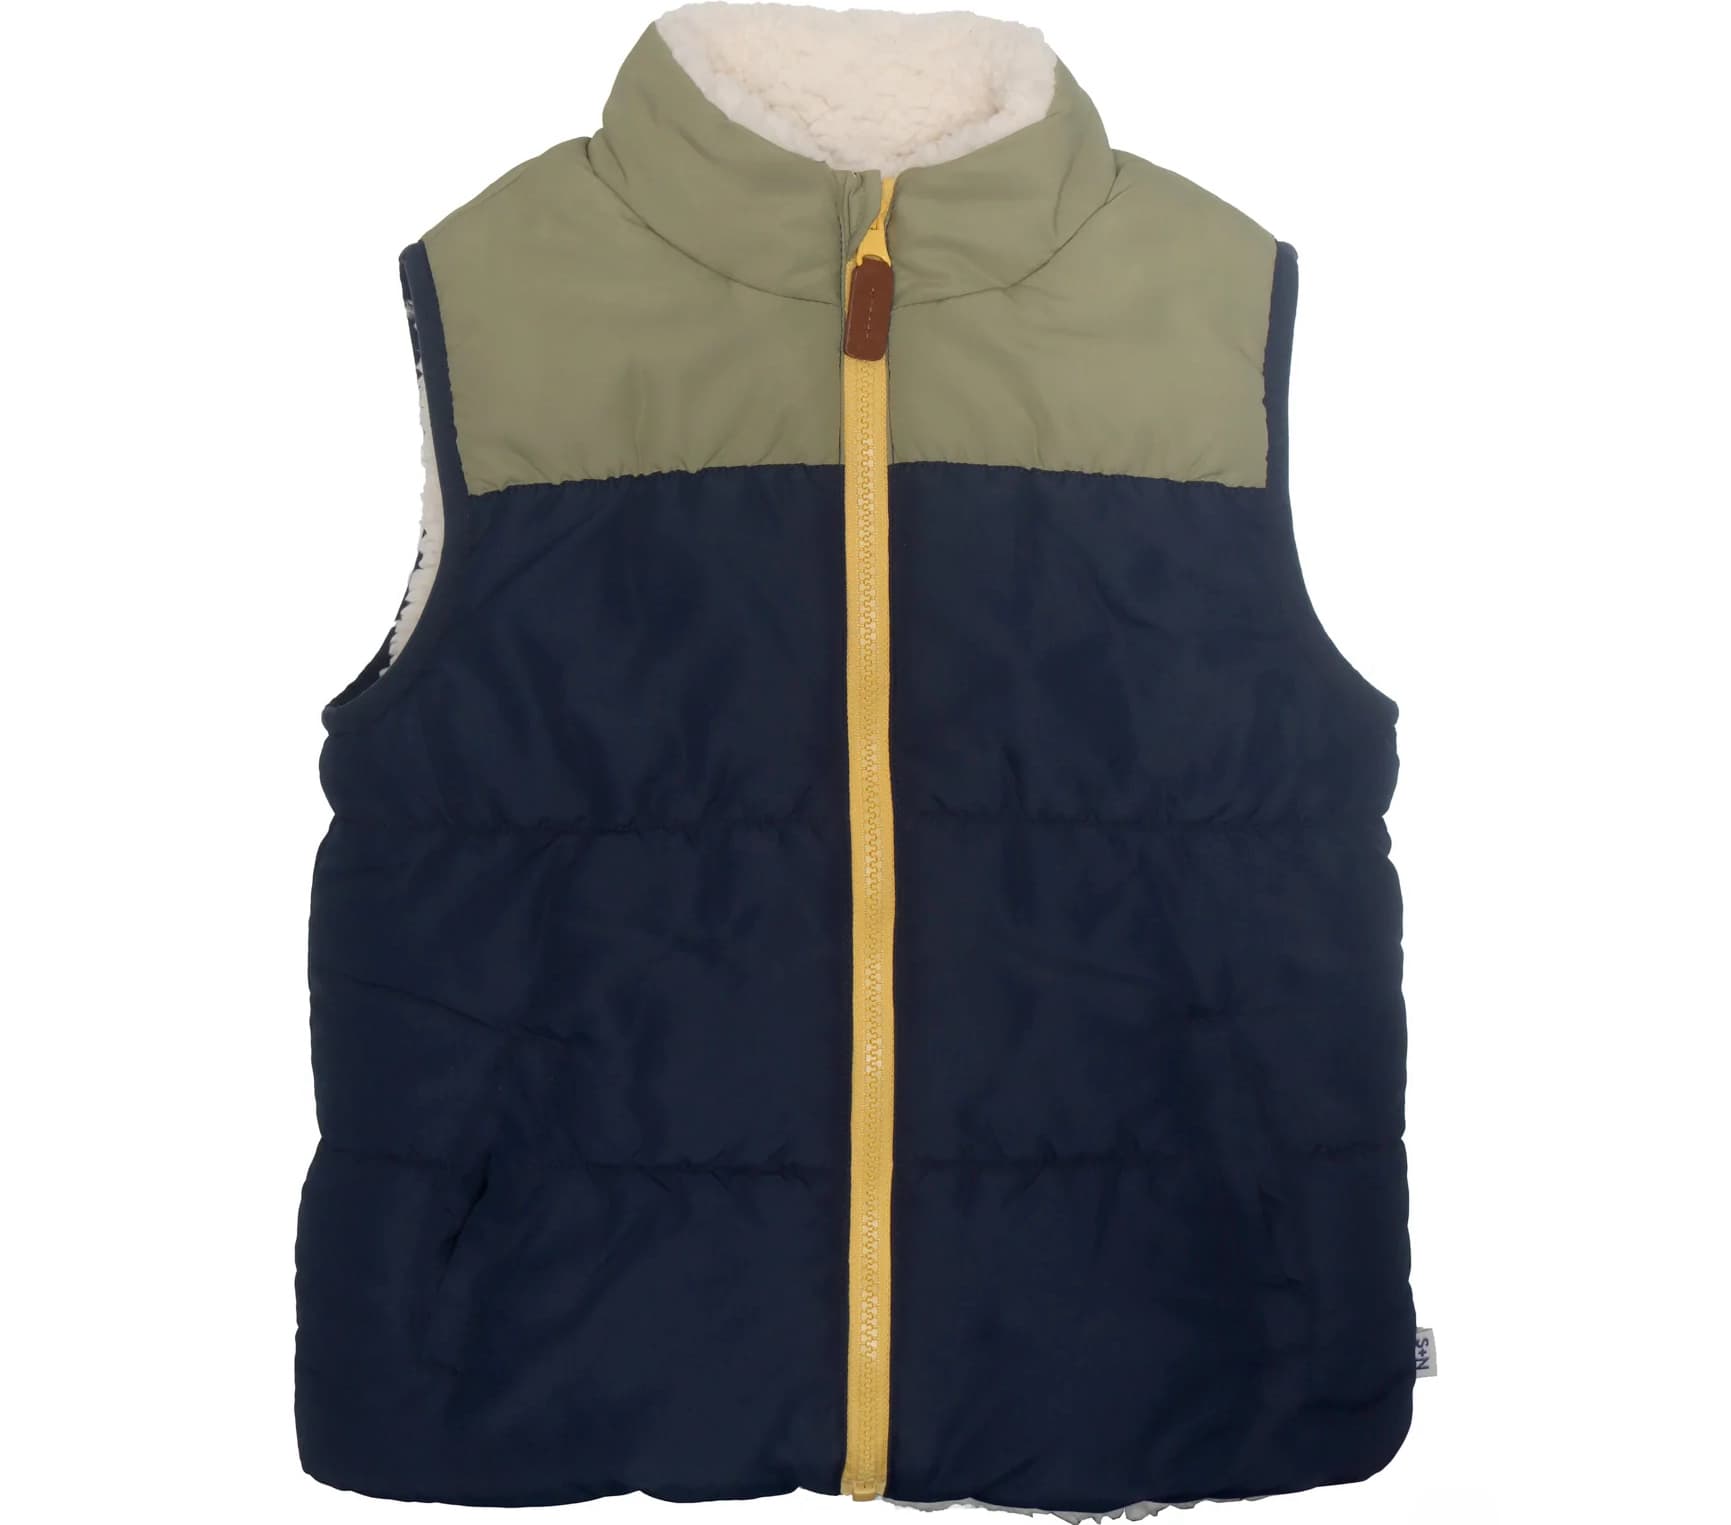 Reversible vest with sherpa lining and a puffer shell in blue and green